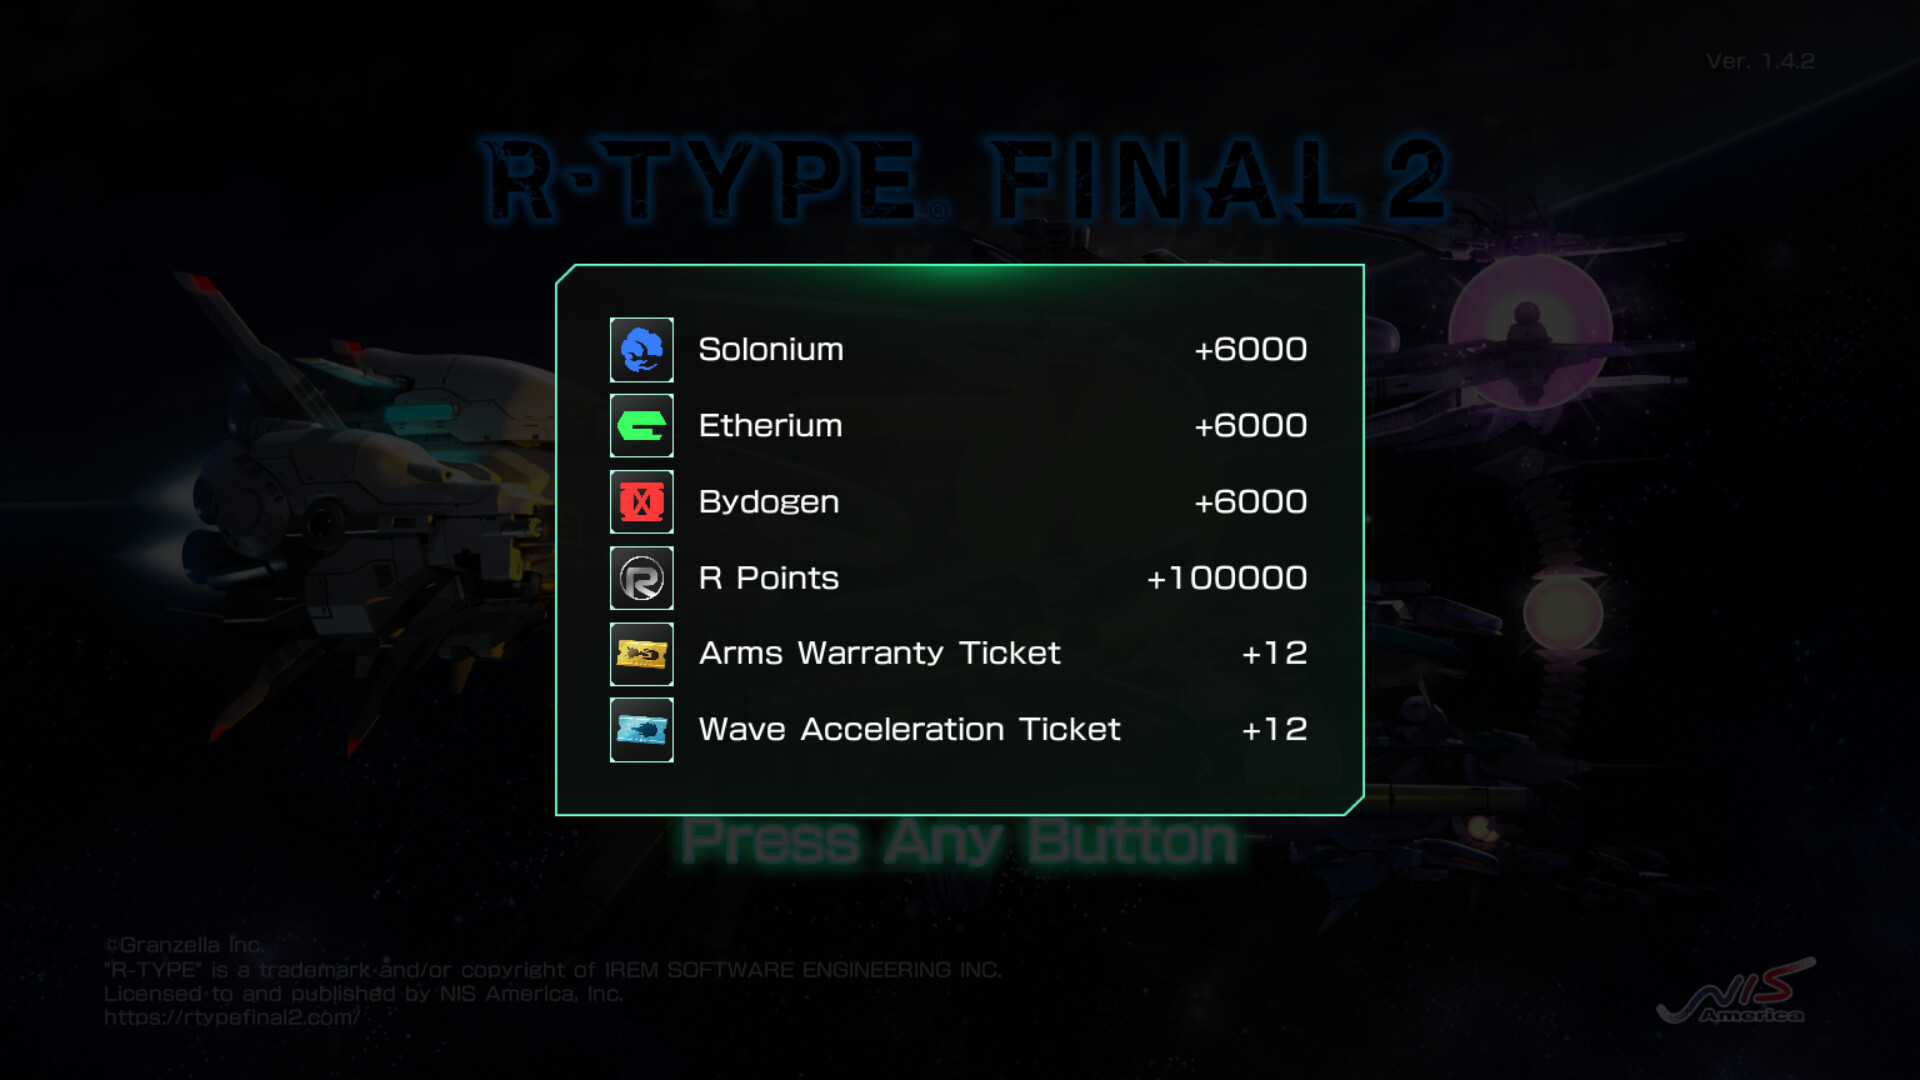 R-Type Final 2 - Ace Pilot Special Training Pack II DLC Steam CD Key [USD 4.66]